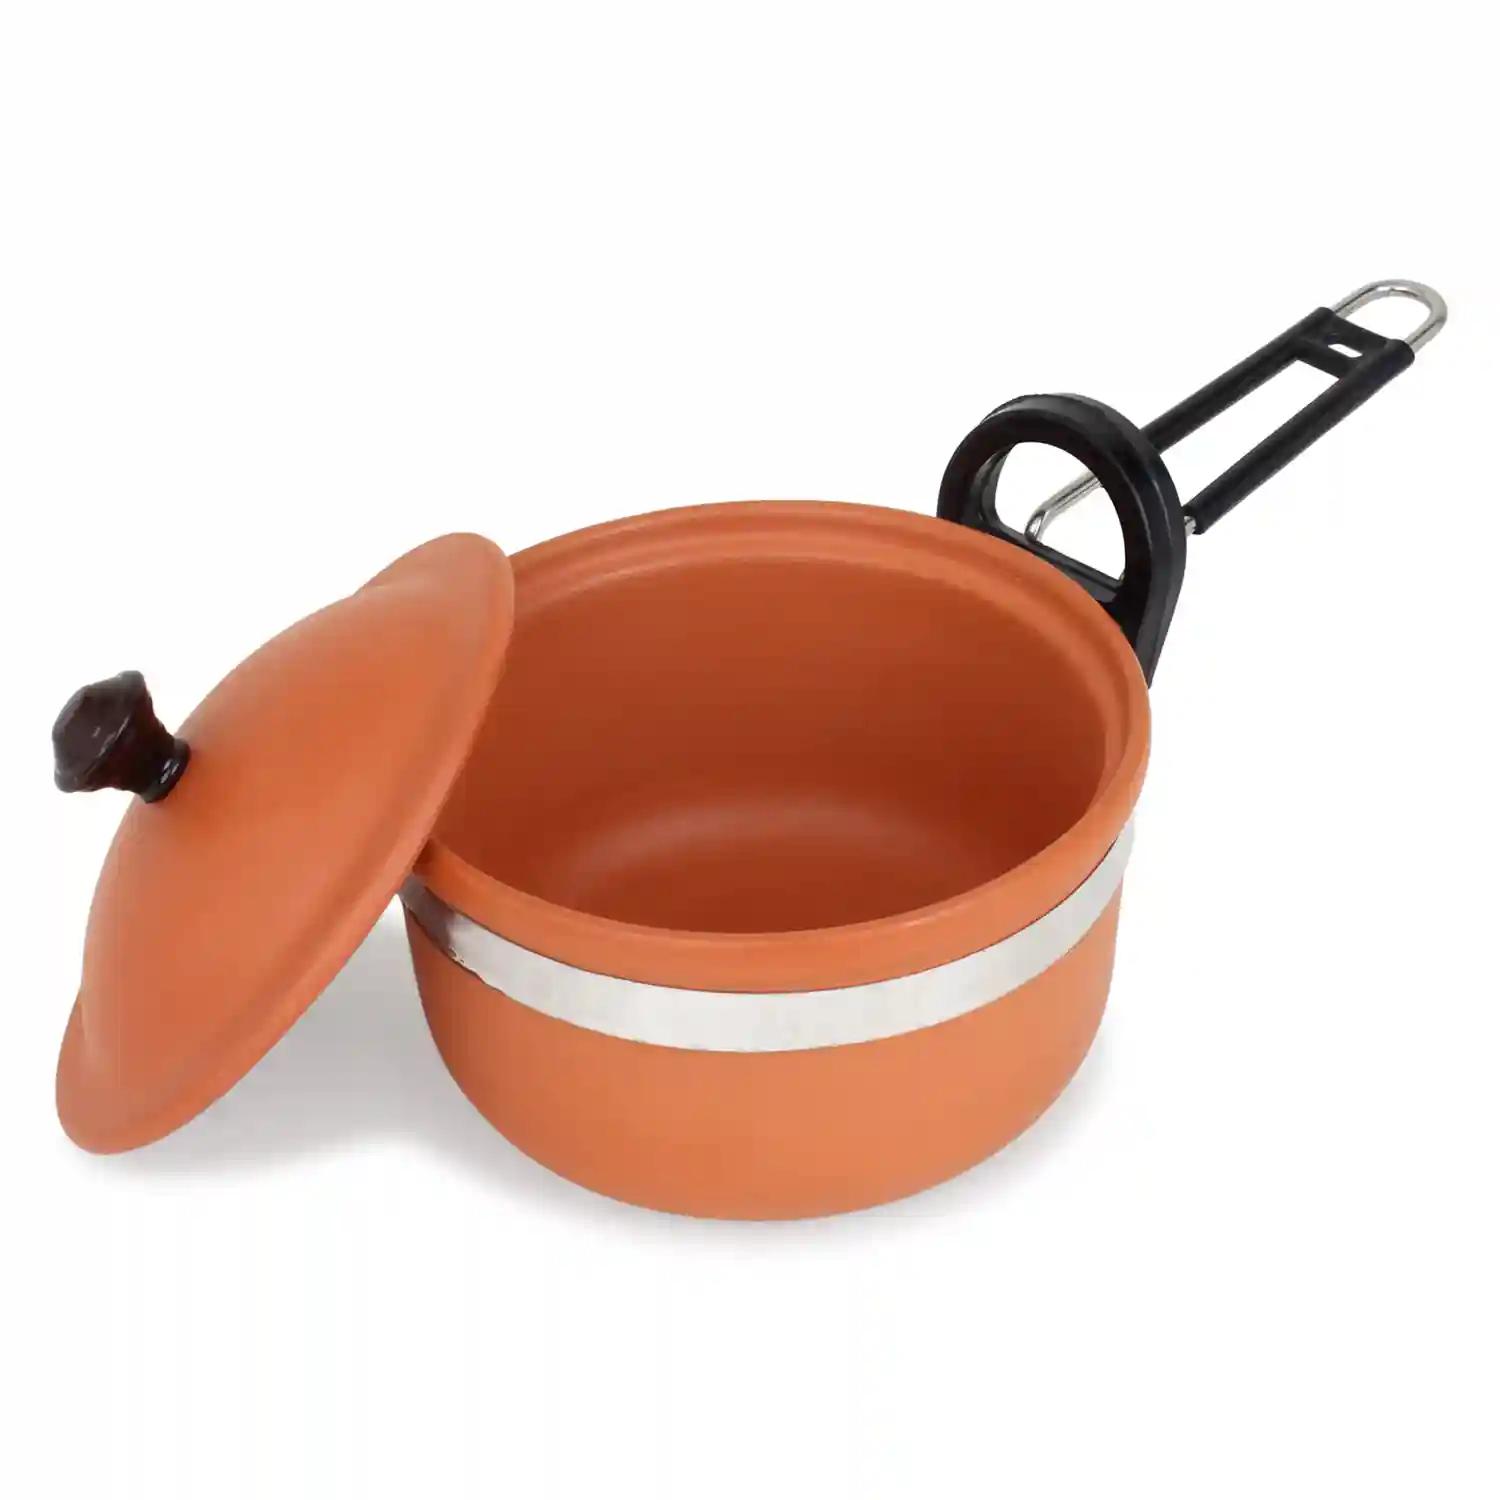 KSI Handmade Terracotta Clay Frying Pan (1.5 litres) with Lid, Eco Friendly Earthen Clay Frying Pan for Cooking and Wooden Palta Spatula